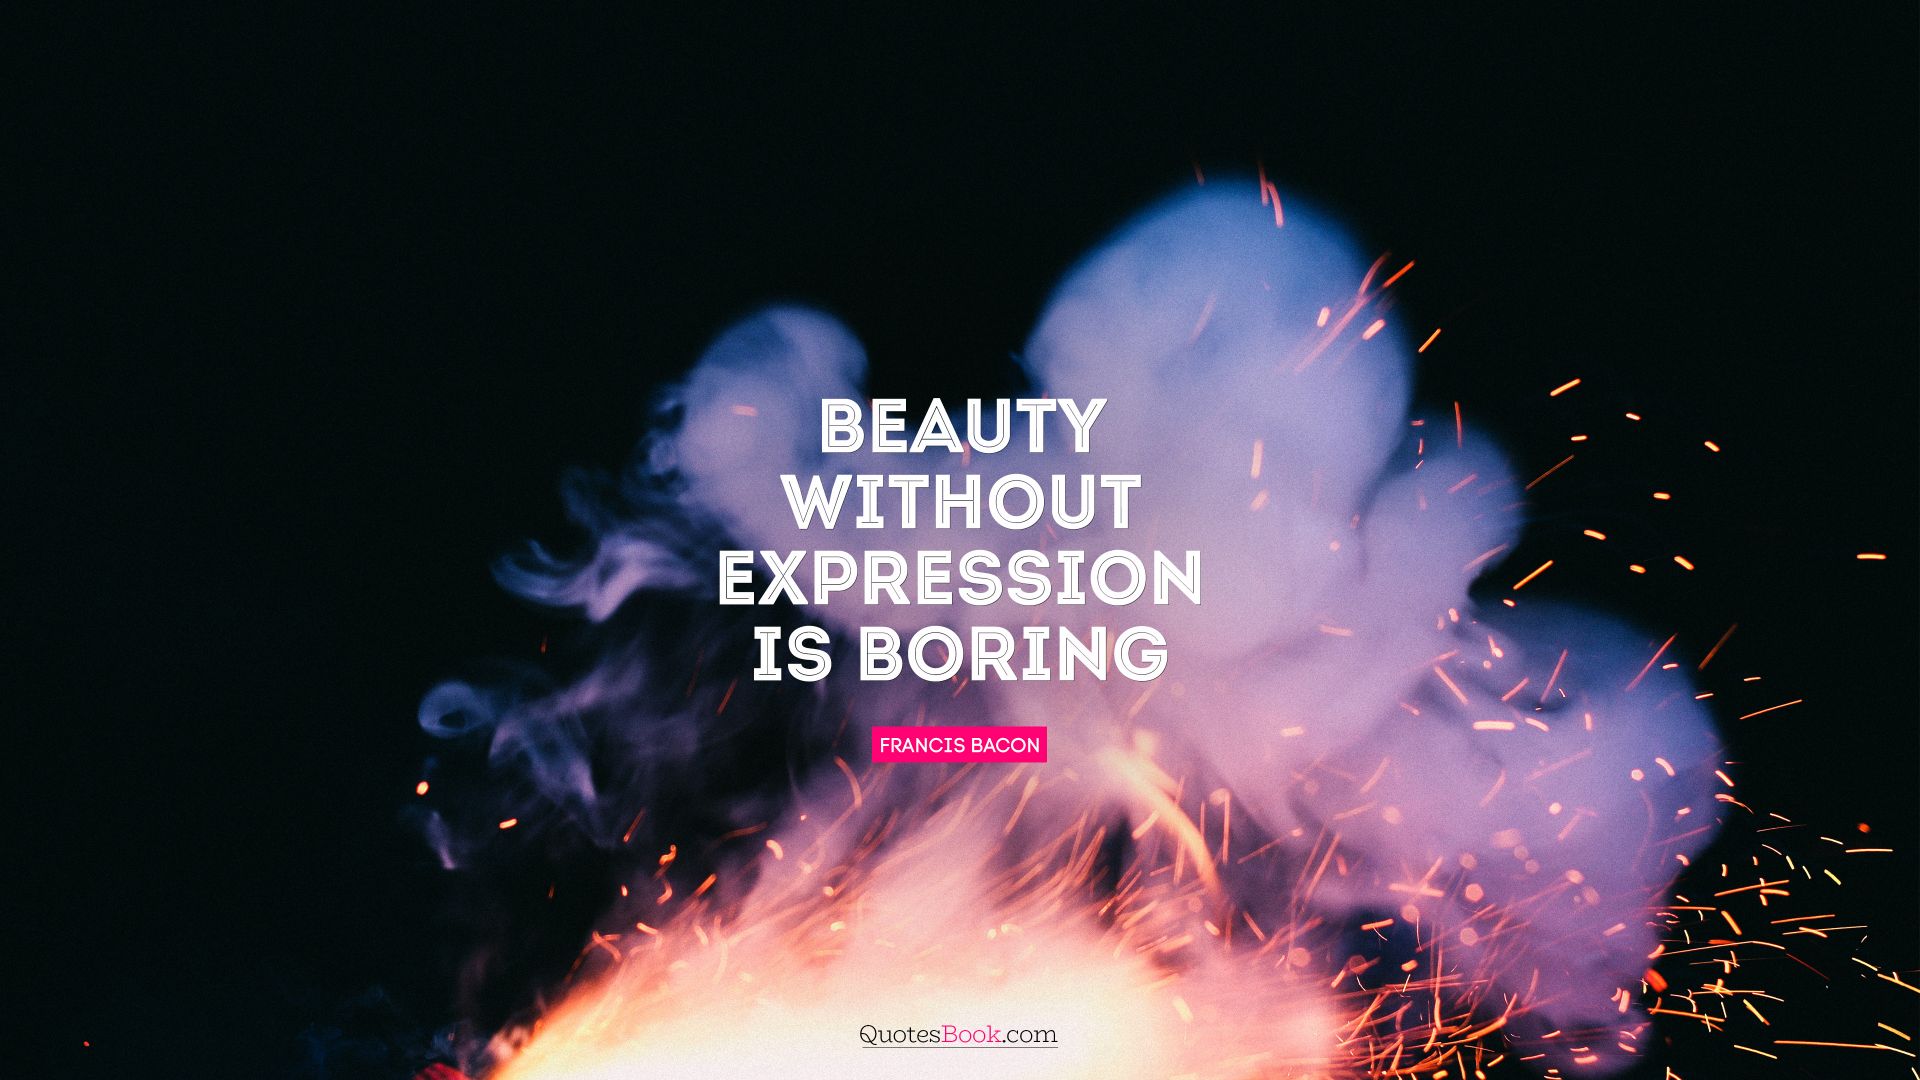 Beauty without expression is boring. - Quote by Ralph Waldo Emerson